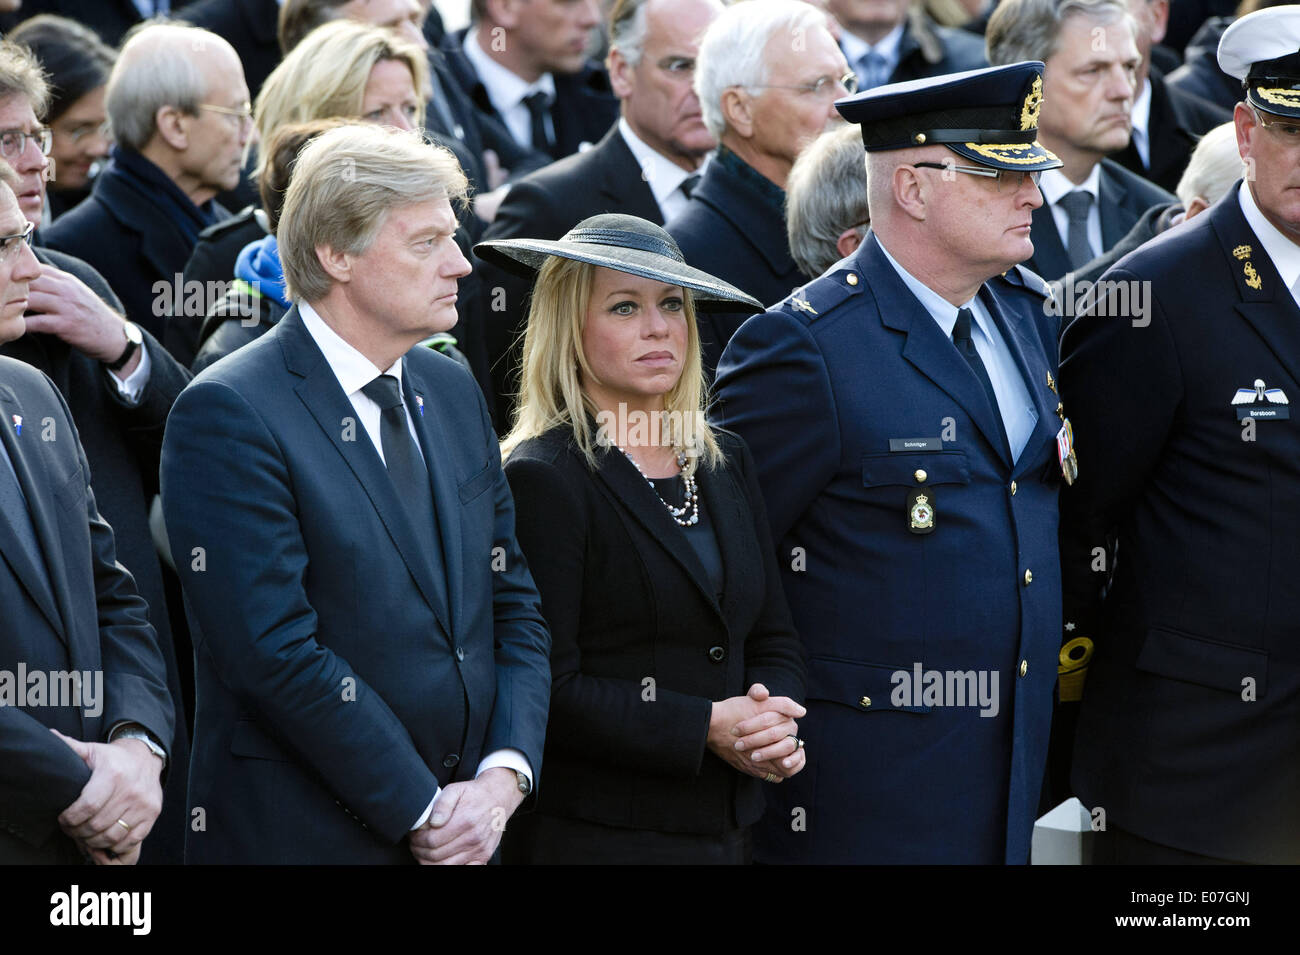 Amsterdam, Netherlands. 4Th May, 2014. 4-5-2014 Amsterdam - Queen Maxima  And King Willem-Alexander At The Wearth Laying Ceremony (Dodenherdenking)  At The Wwii Memorial At The Monument Op De Dam In Amsterdam. Koning